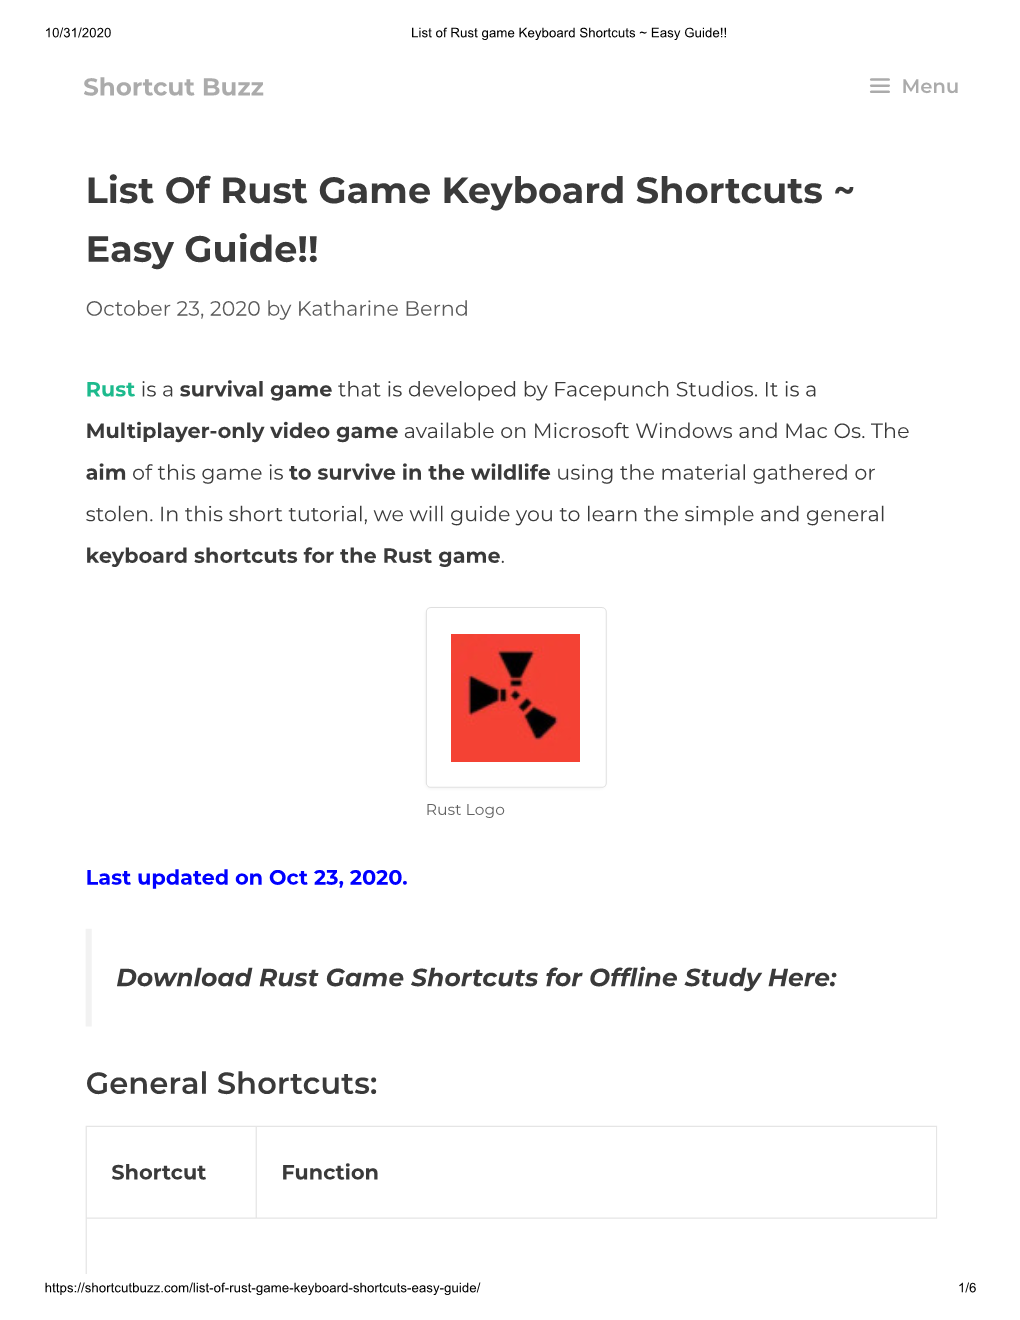 List of Rust Game Keyboard Shortcuts ~ Easy Guide!!